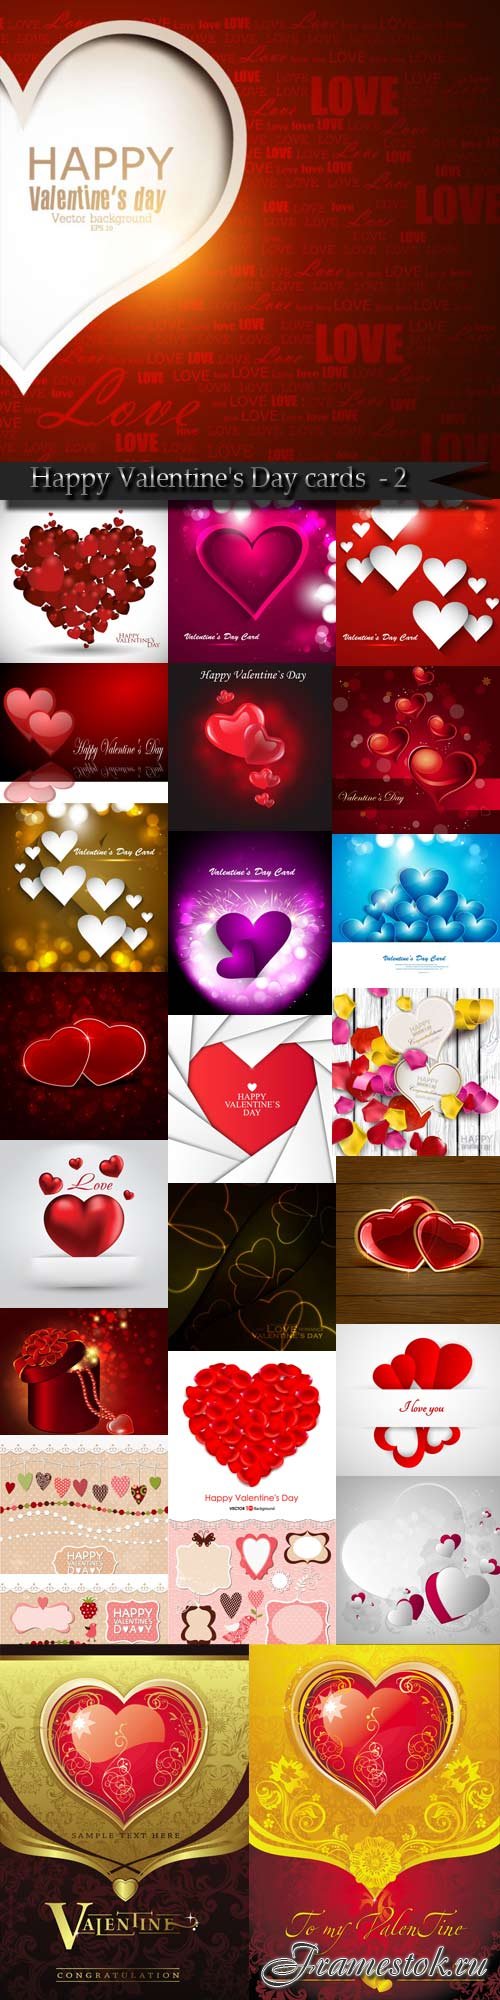 Happy Valentine's Day cards and backgrounds - 2